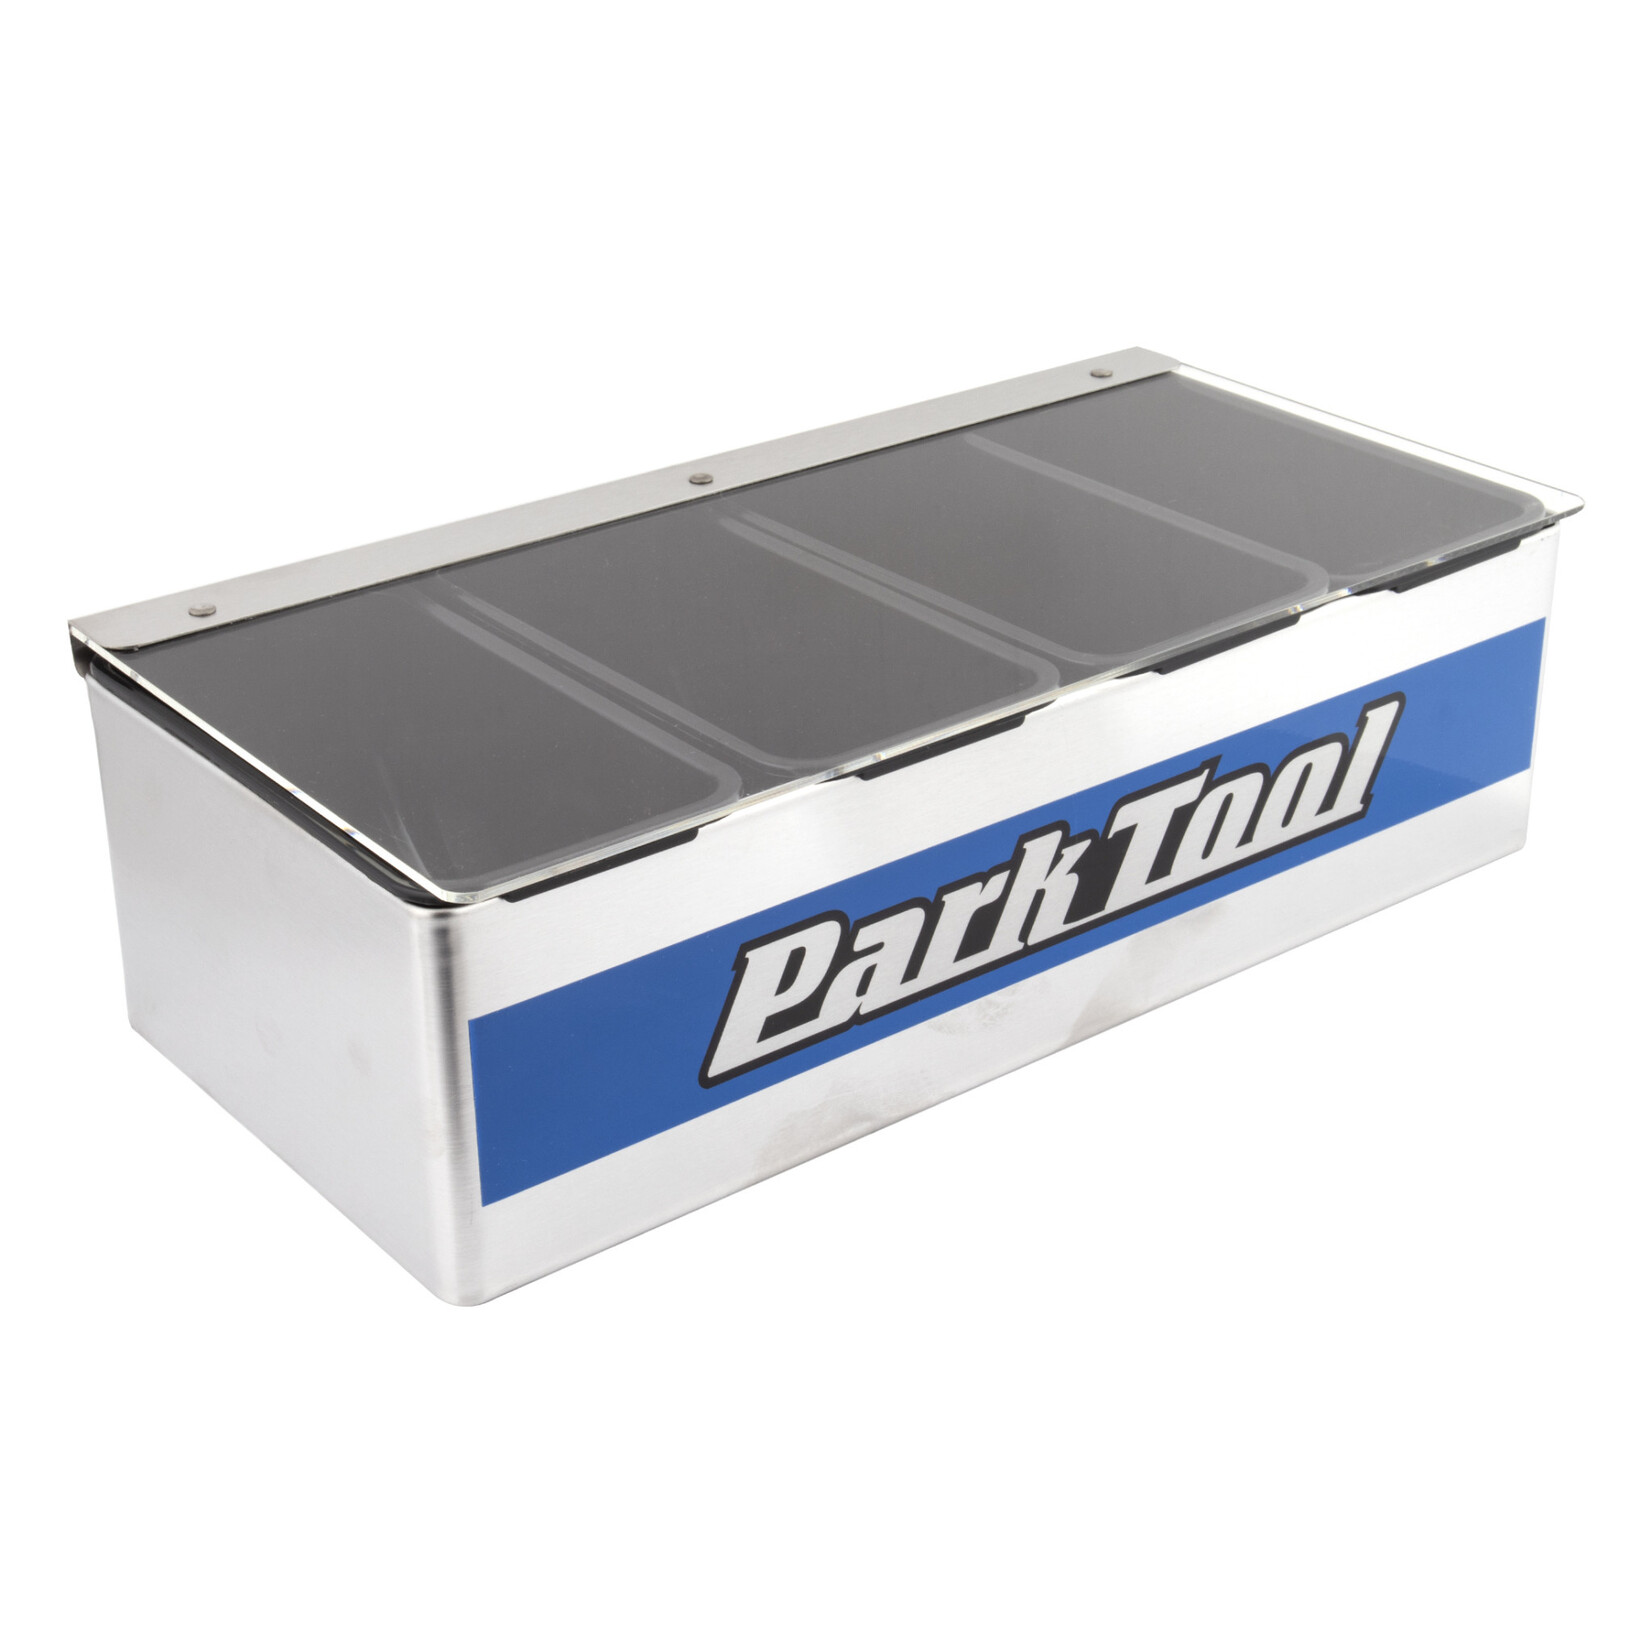 PARK TOOL Park Tool Bench Top Small Parts Holder, JH-1